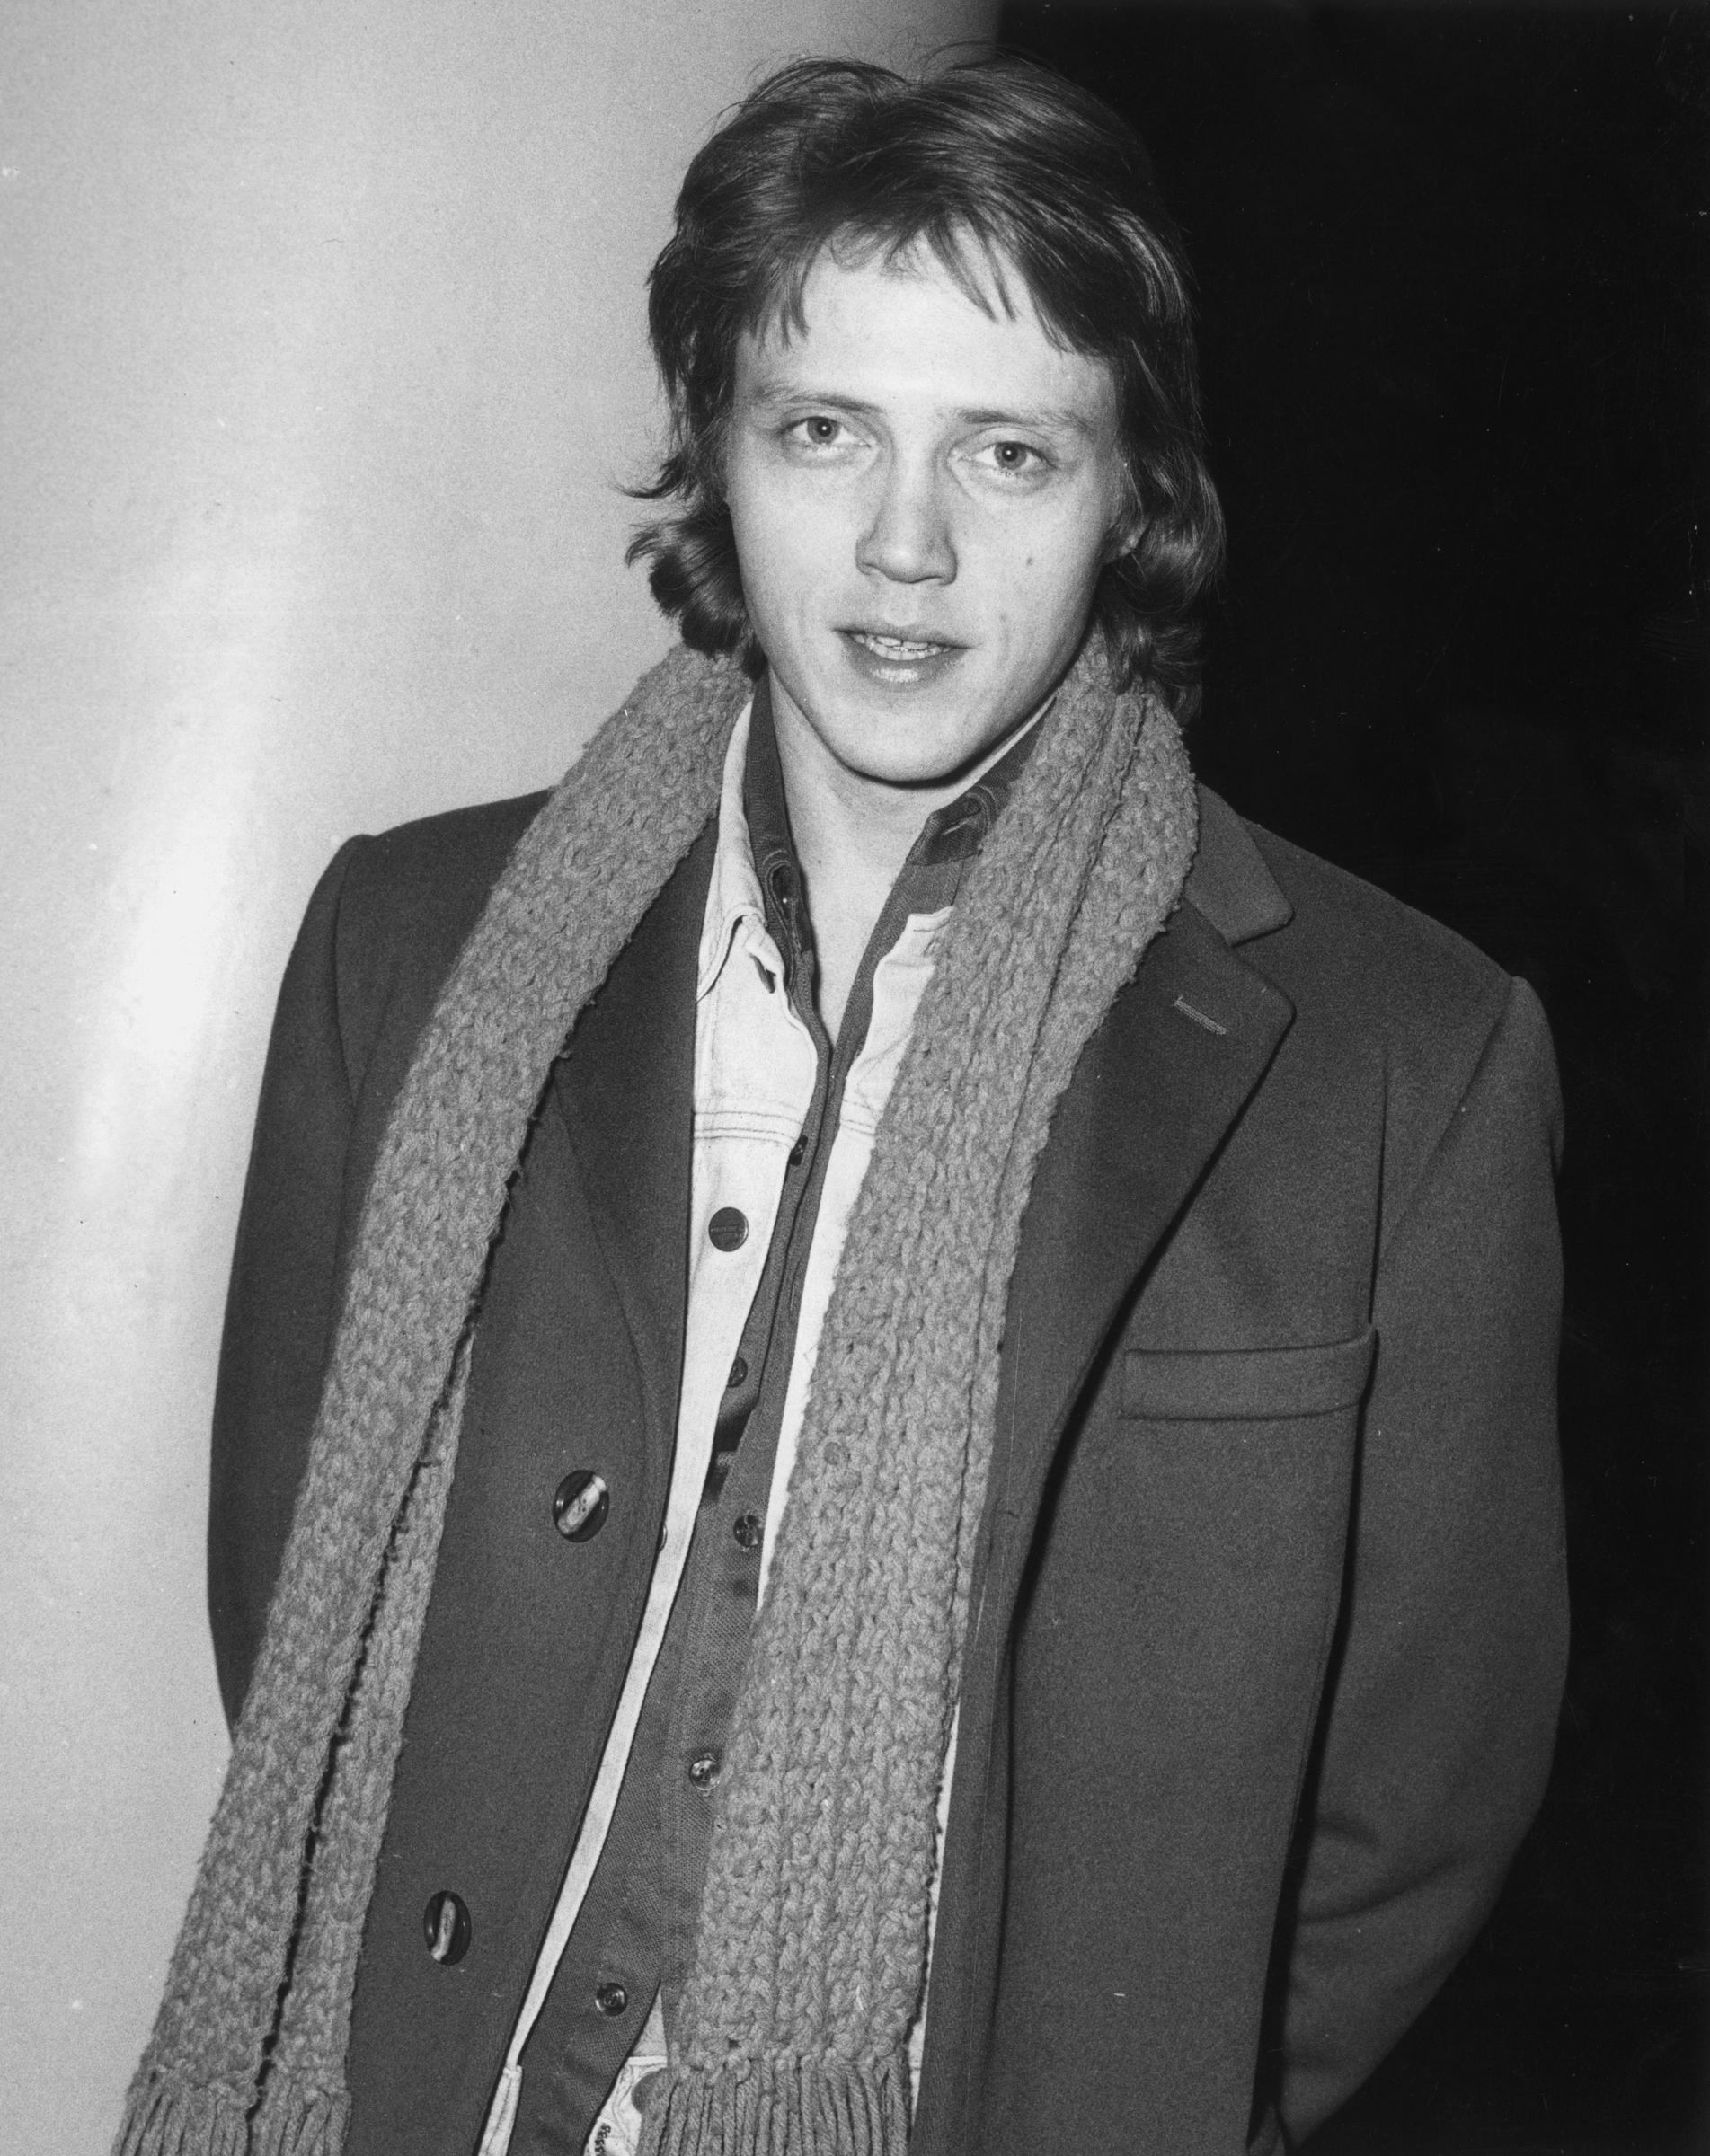 Christopher Walken photographed on January 1, 1974 in New York City. | Source: Getty Images